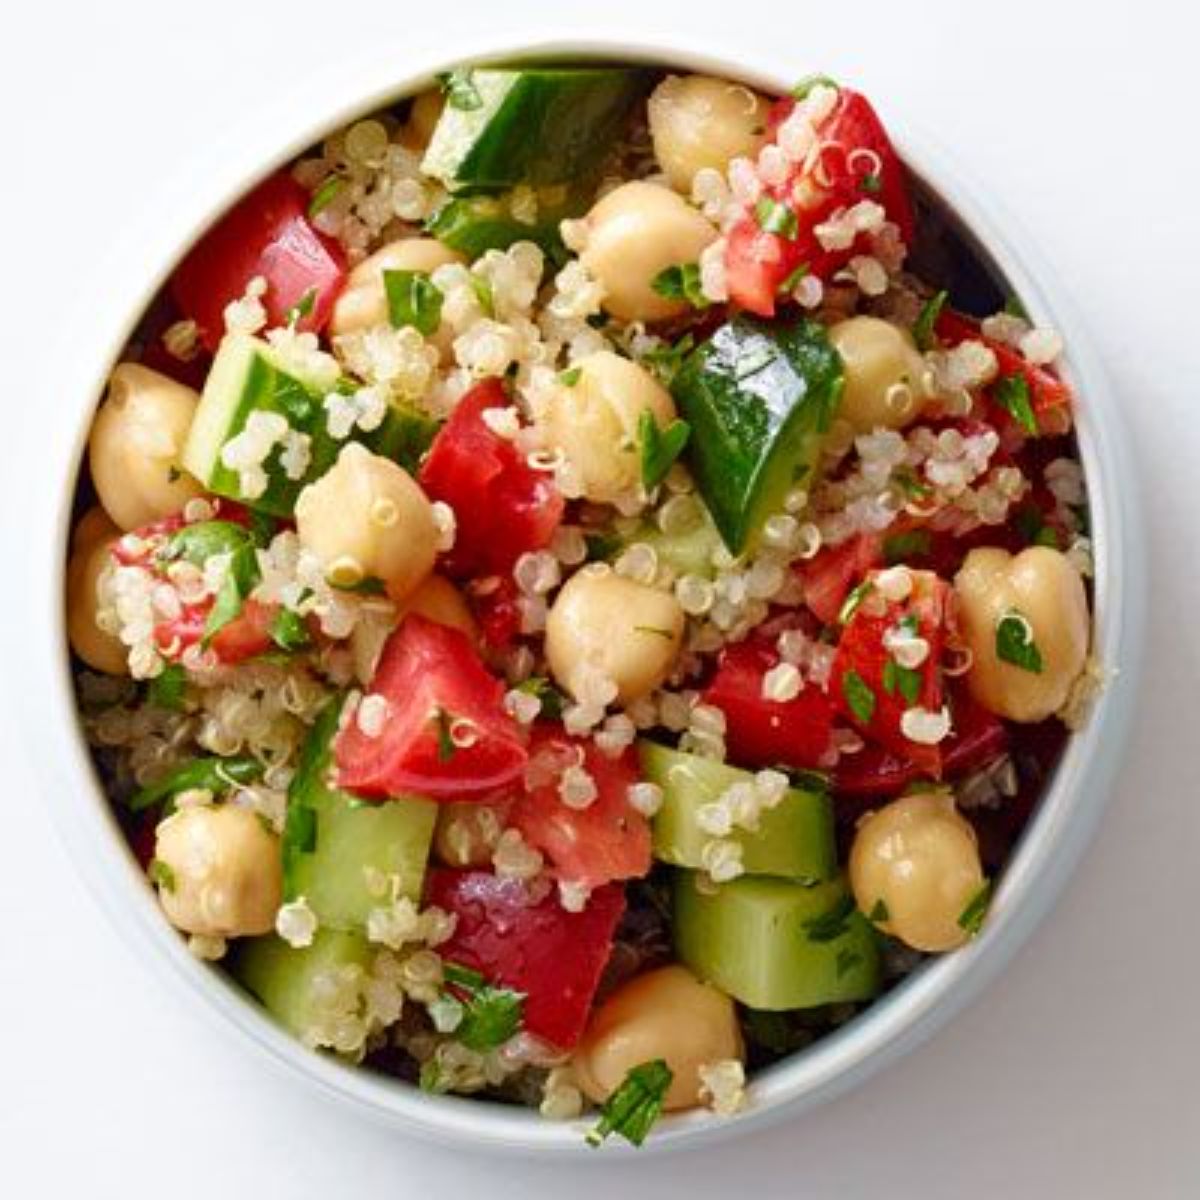 Healthy quinoa tabbouleh salad in a white bowl.